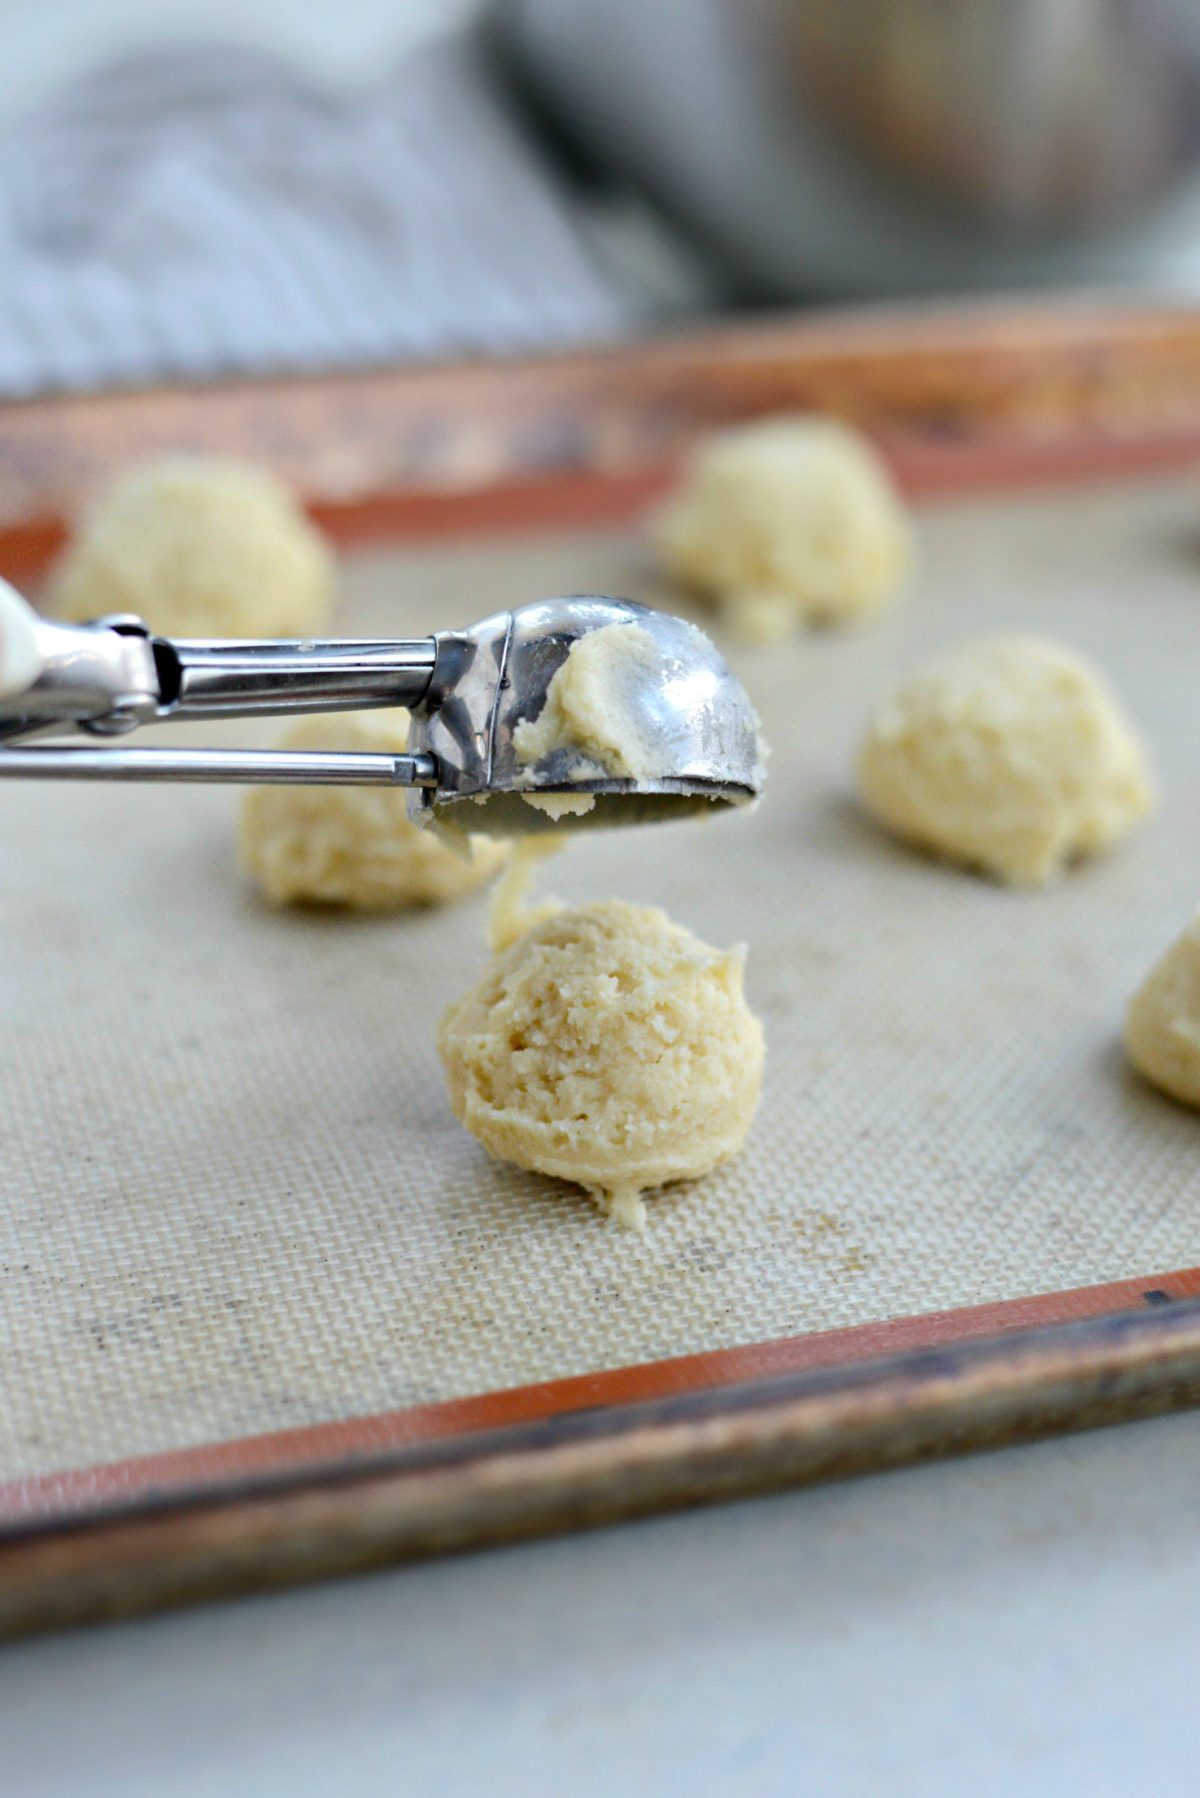 Scoop out onto a prepared baking sheet lined with parchment or a silicone mat.